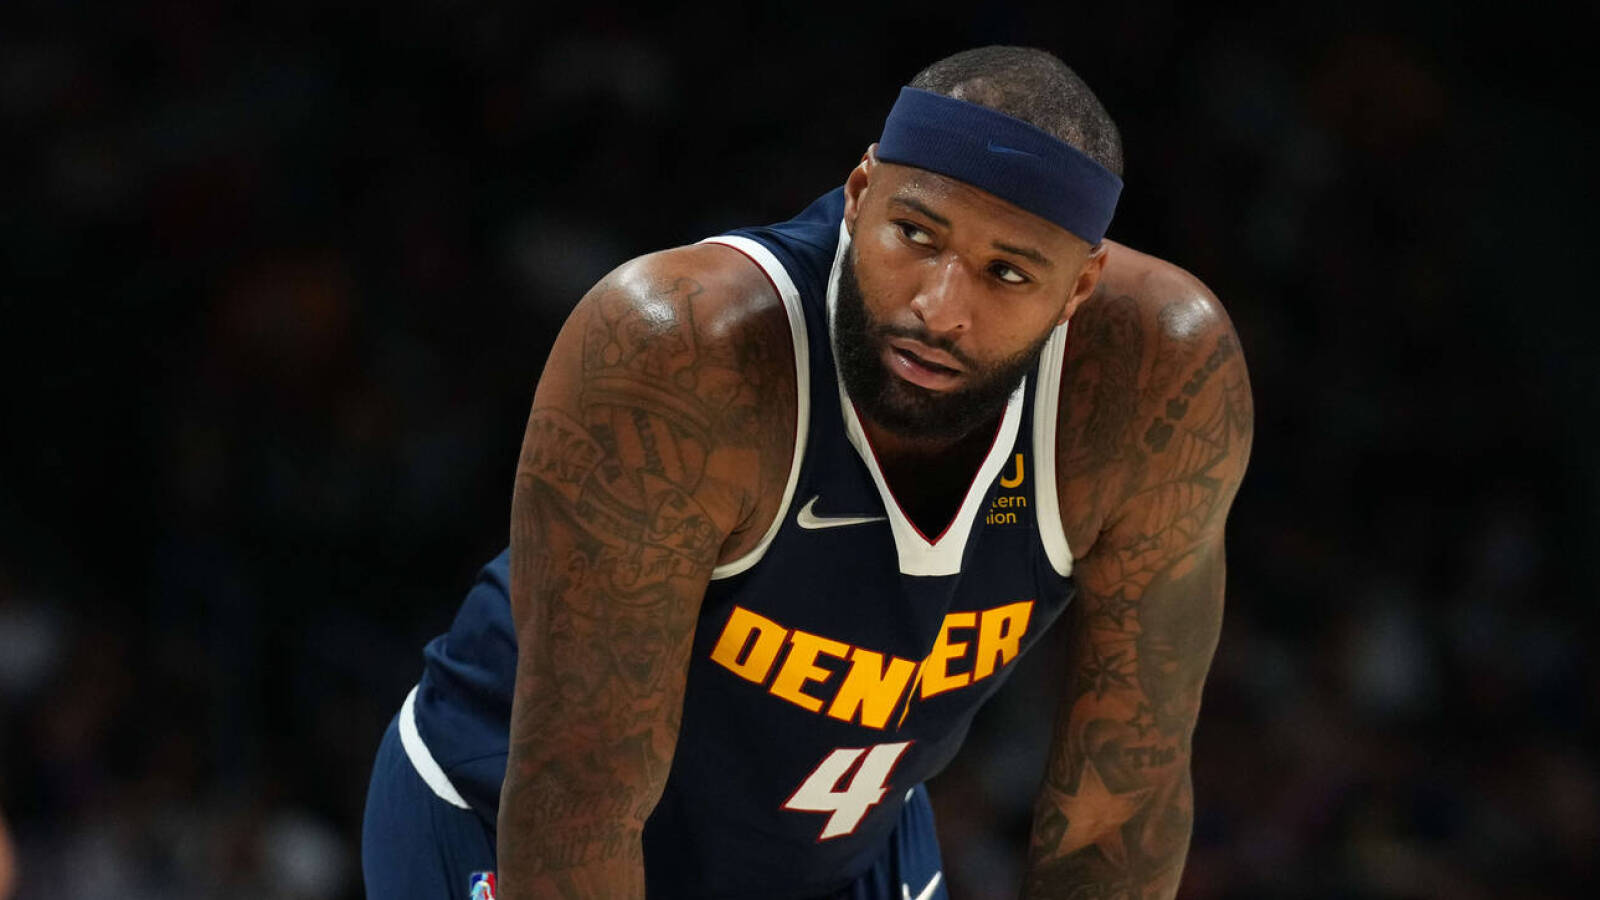 DeMarcus Cousins signs with Puerto Rican team one day after making bold proclamation